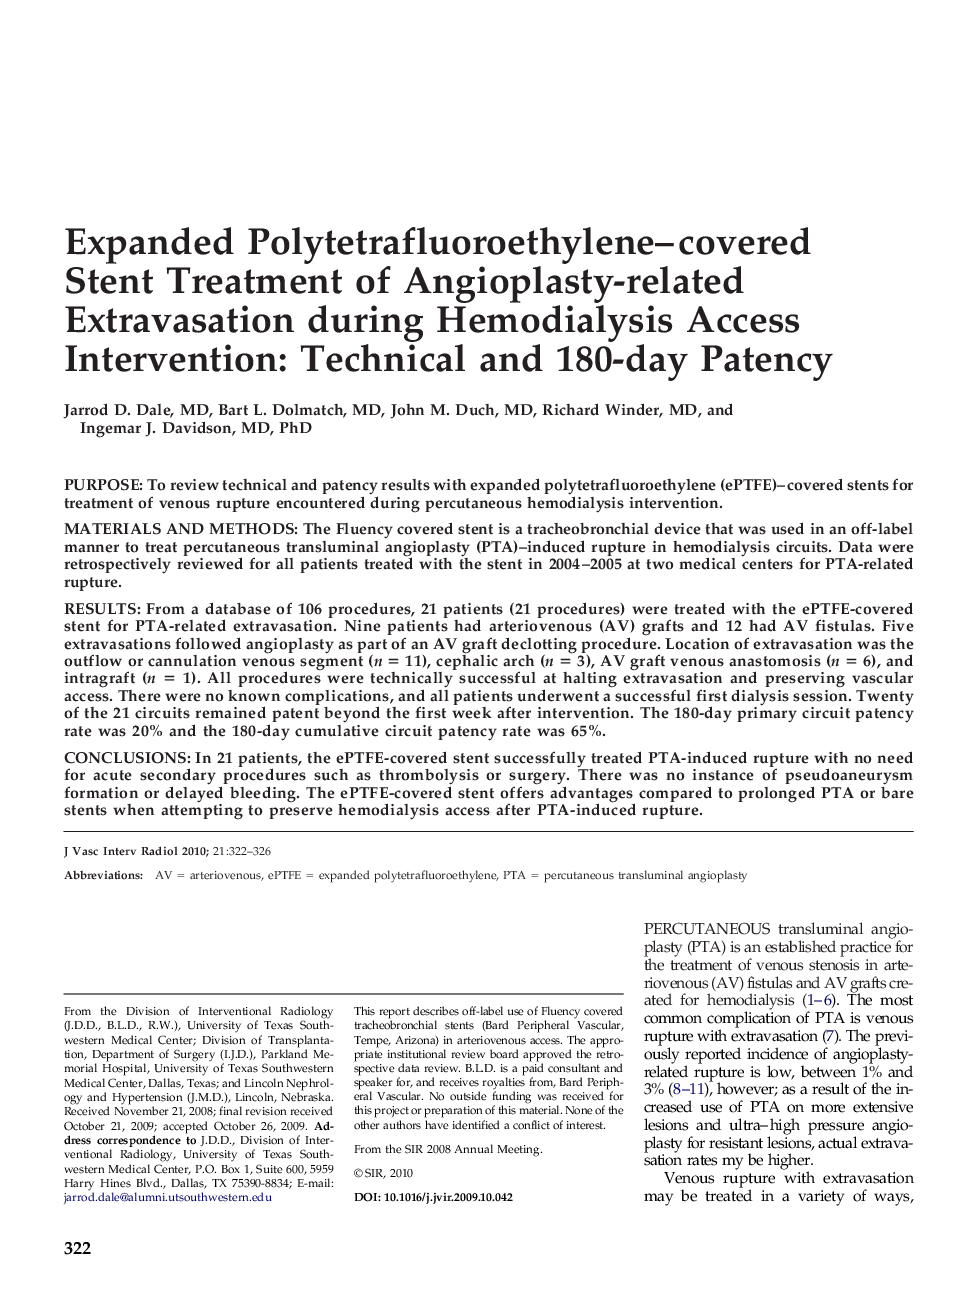 Expanded Polytetrafluoroethylene-covered Stent Treatment of Angioplasty-related Extravasation during Hemodialysis Access Intervention: Technical and 180-day Patency